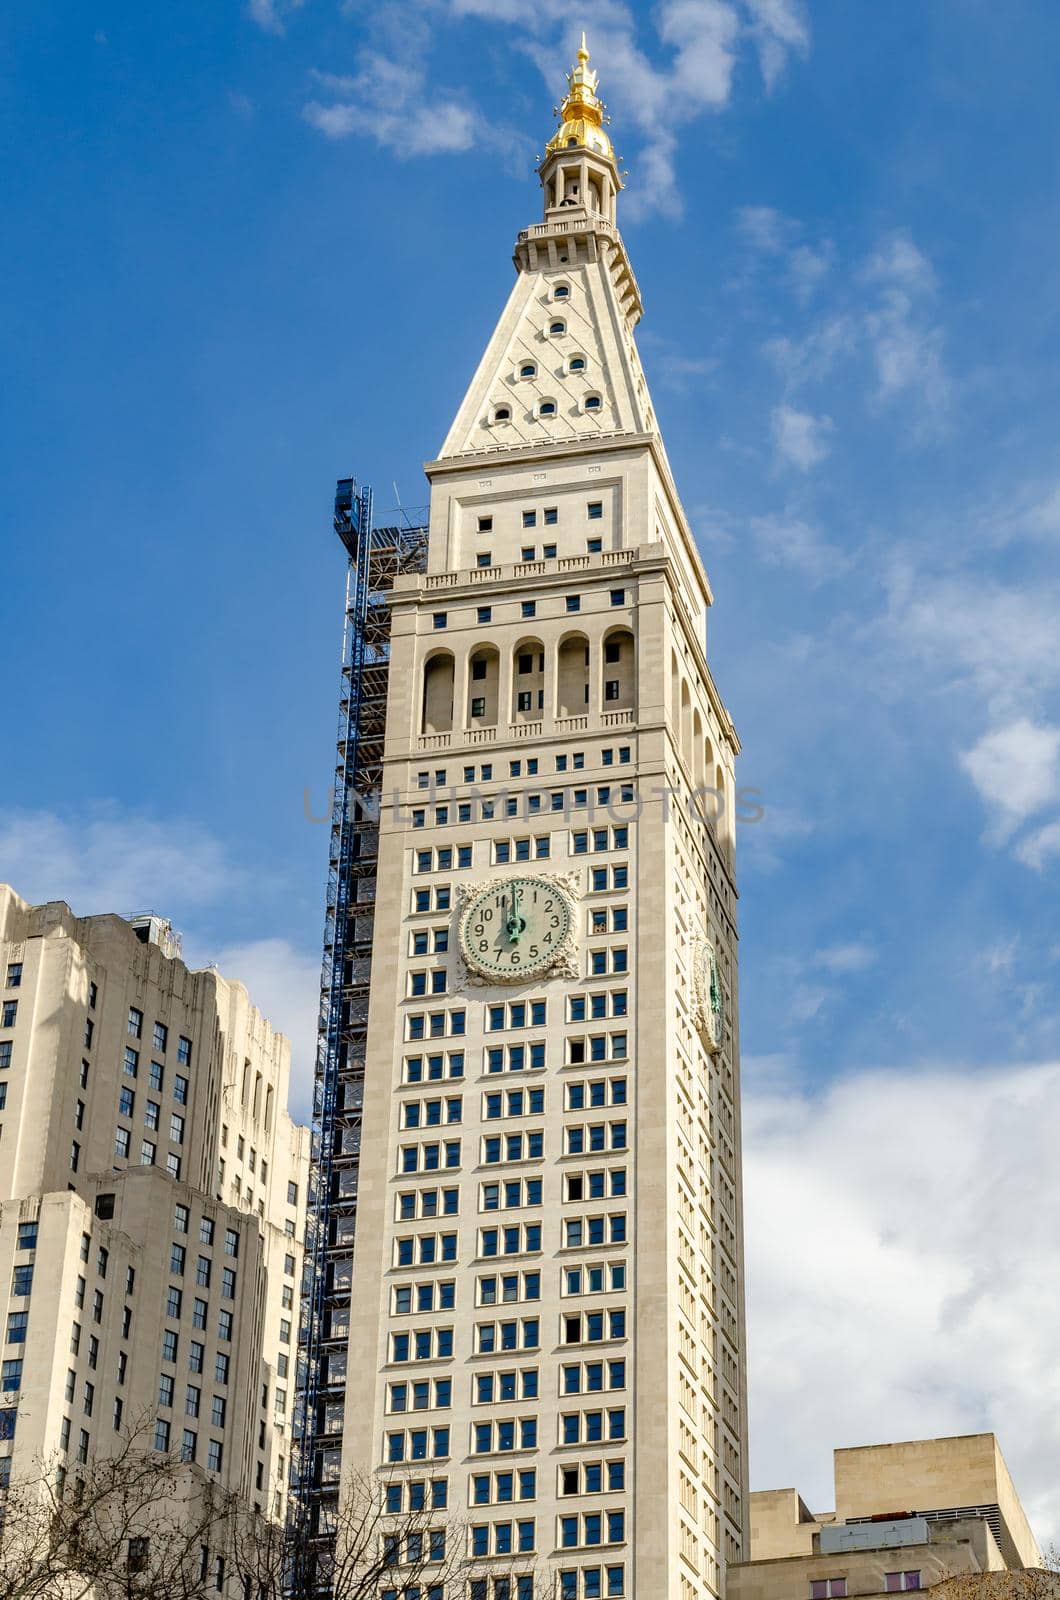 The New York EDITION Hotel Clock Tower, view from low angle, New York City during sunny winter day, Blue sky in the background, vertical